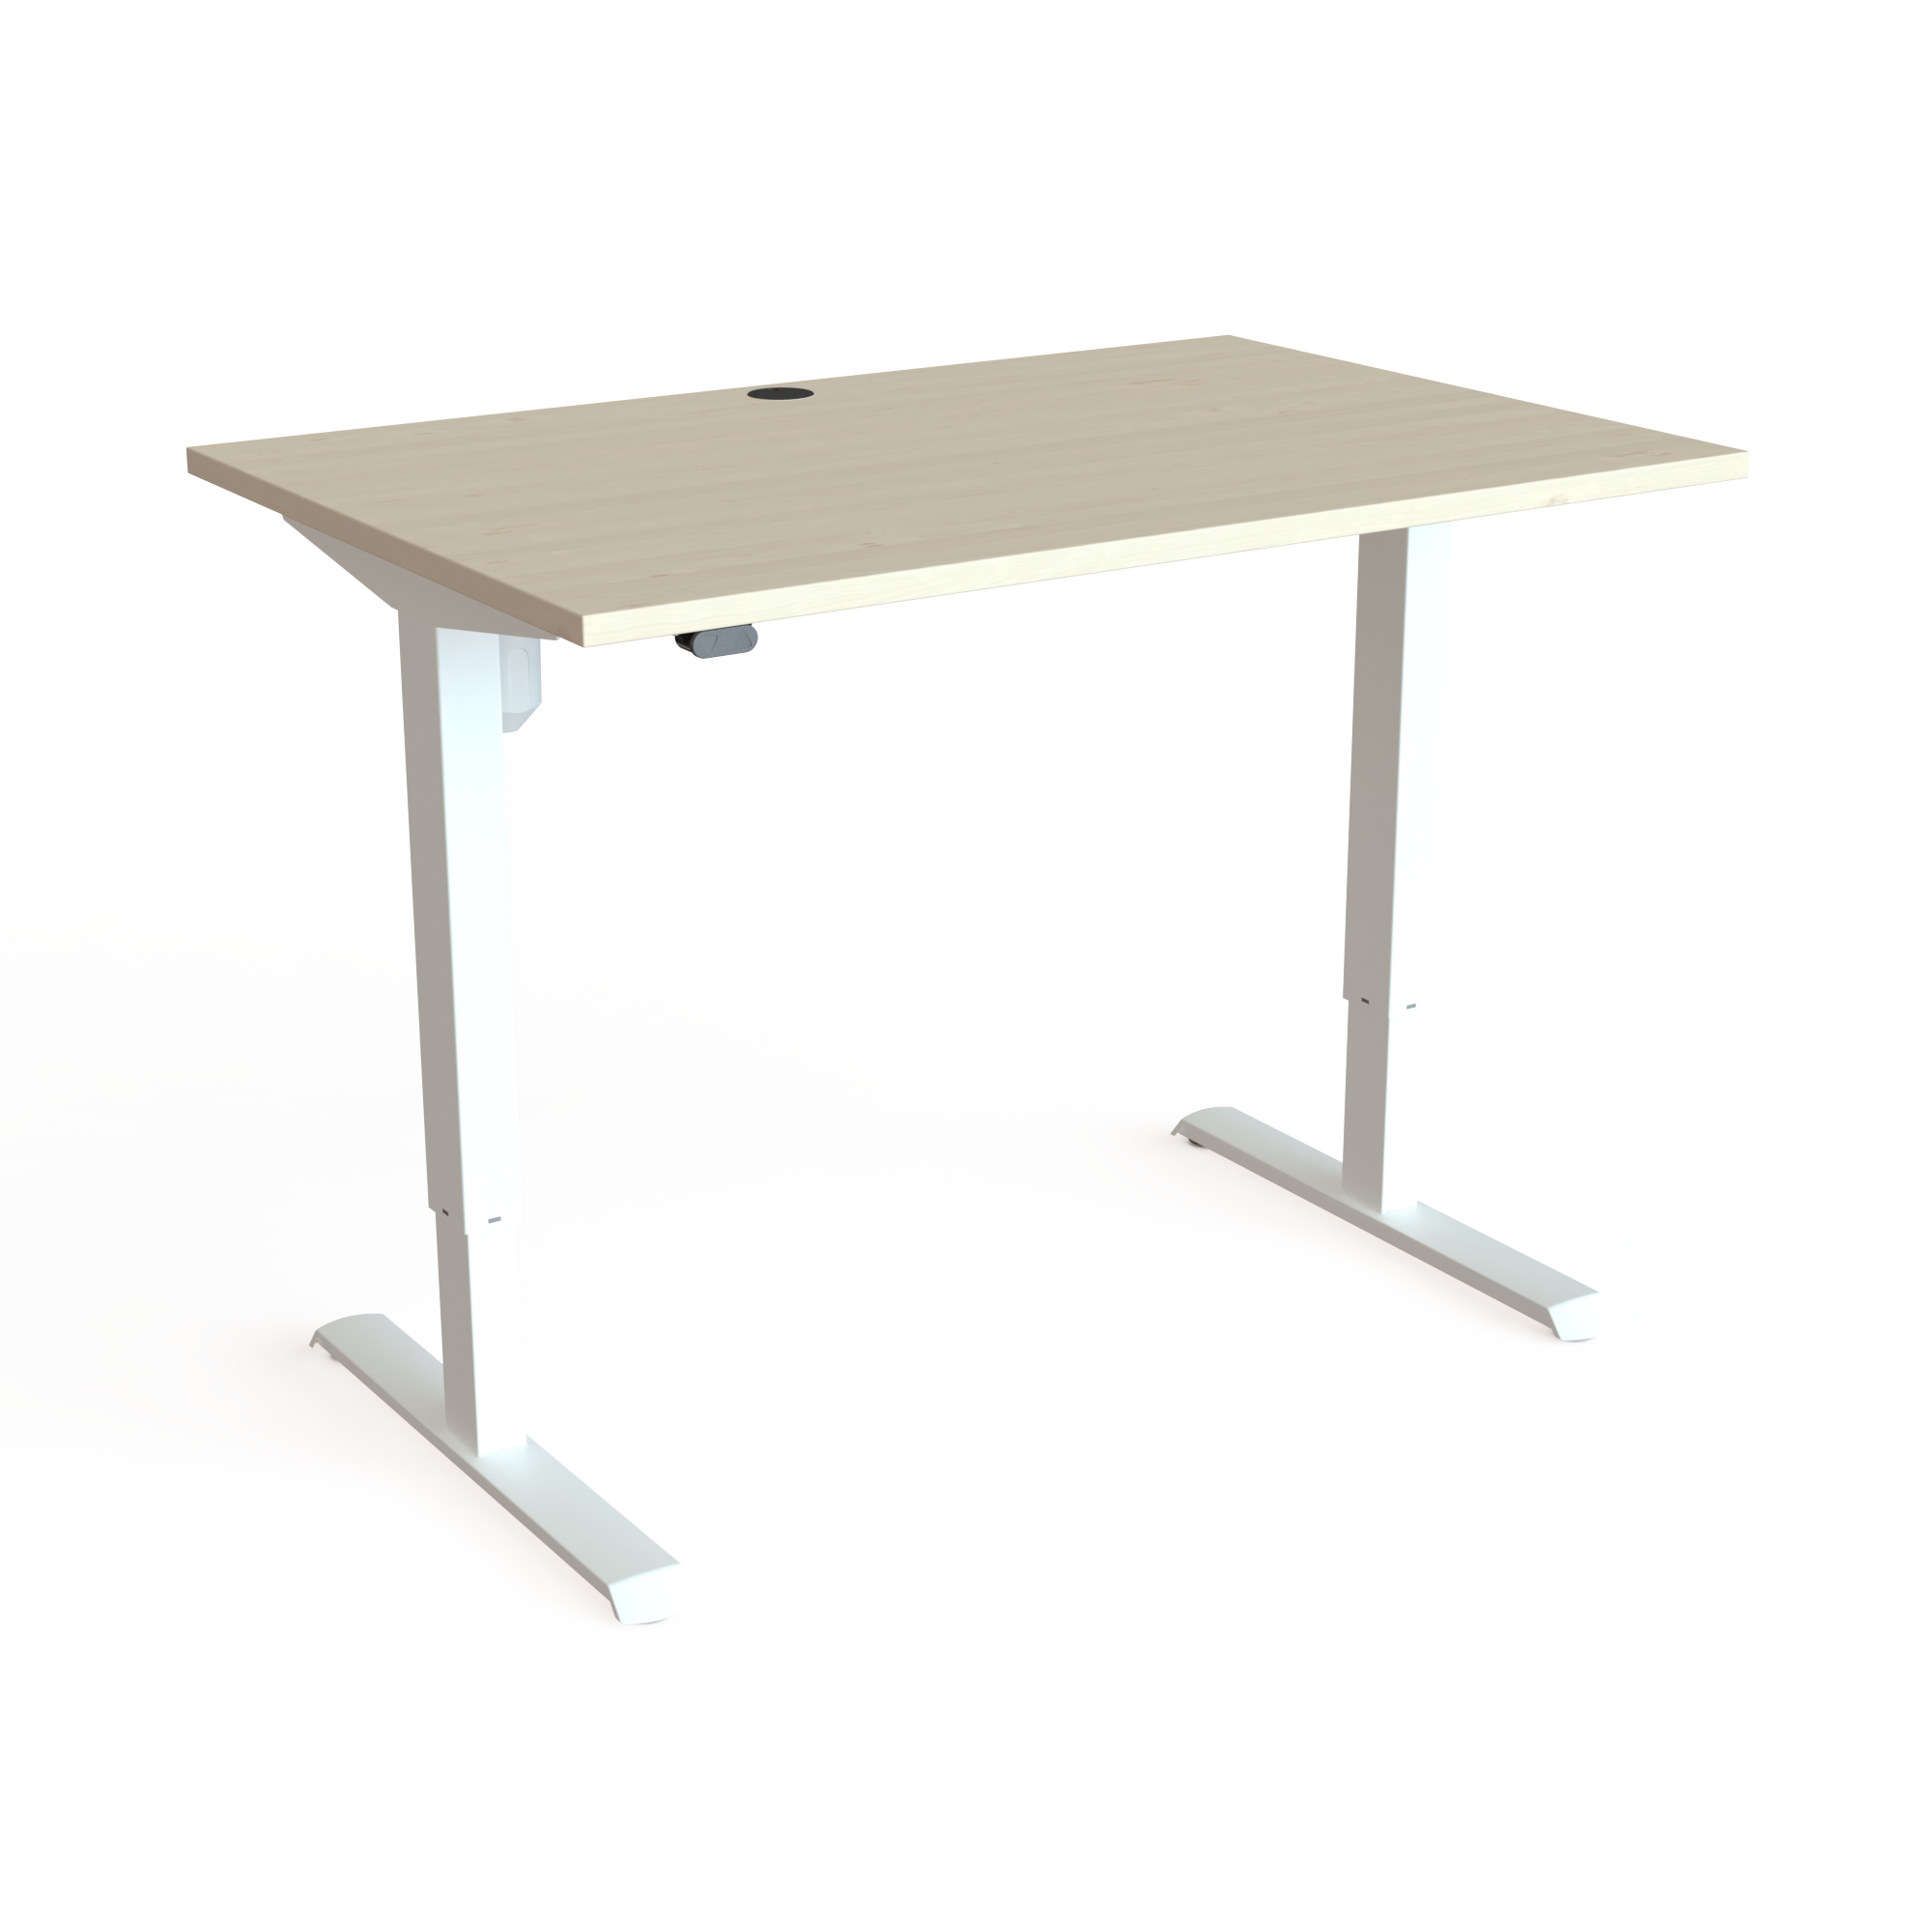 Electric Adjustable Desk | 120x80 cm | Maple with white frame